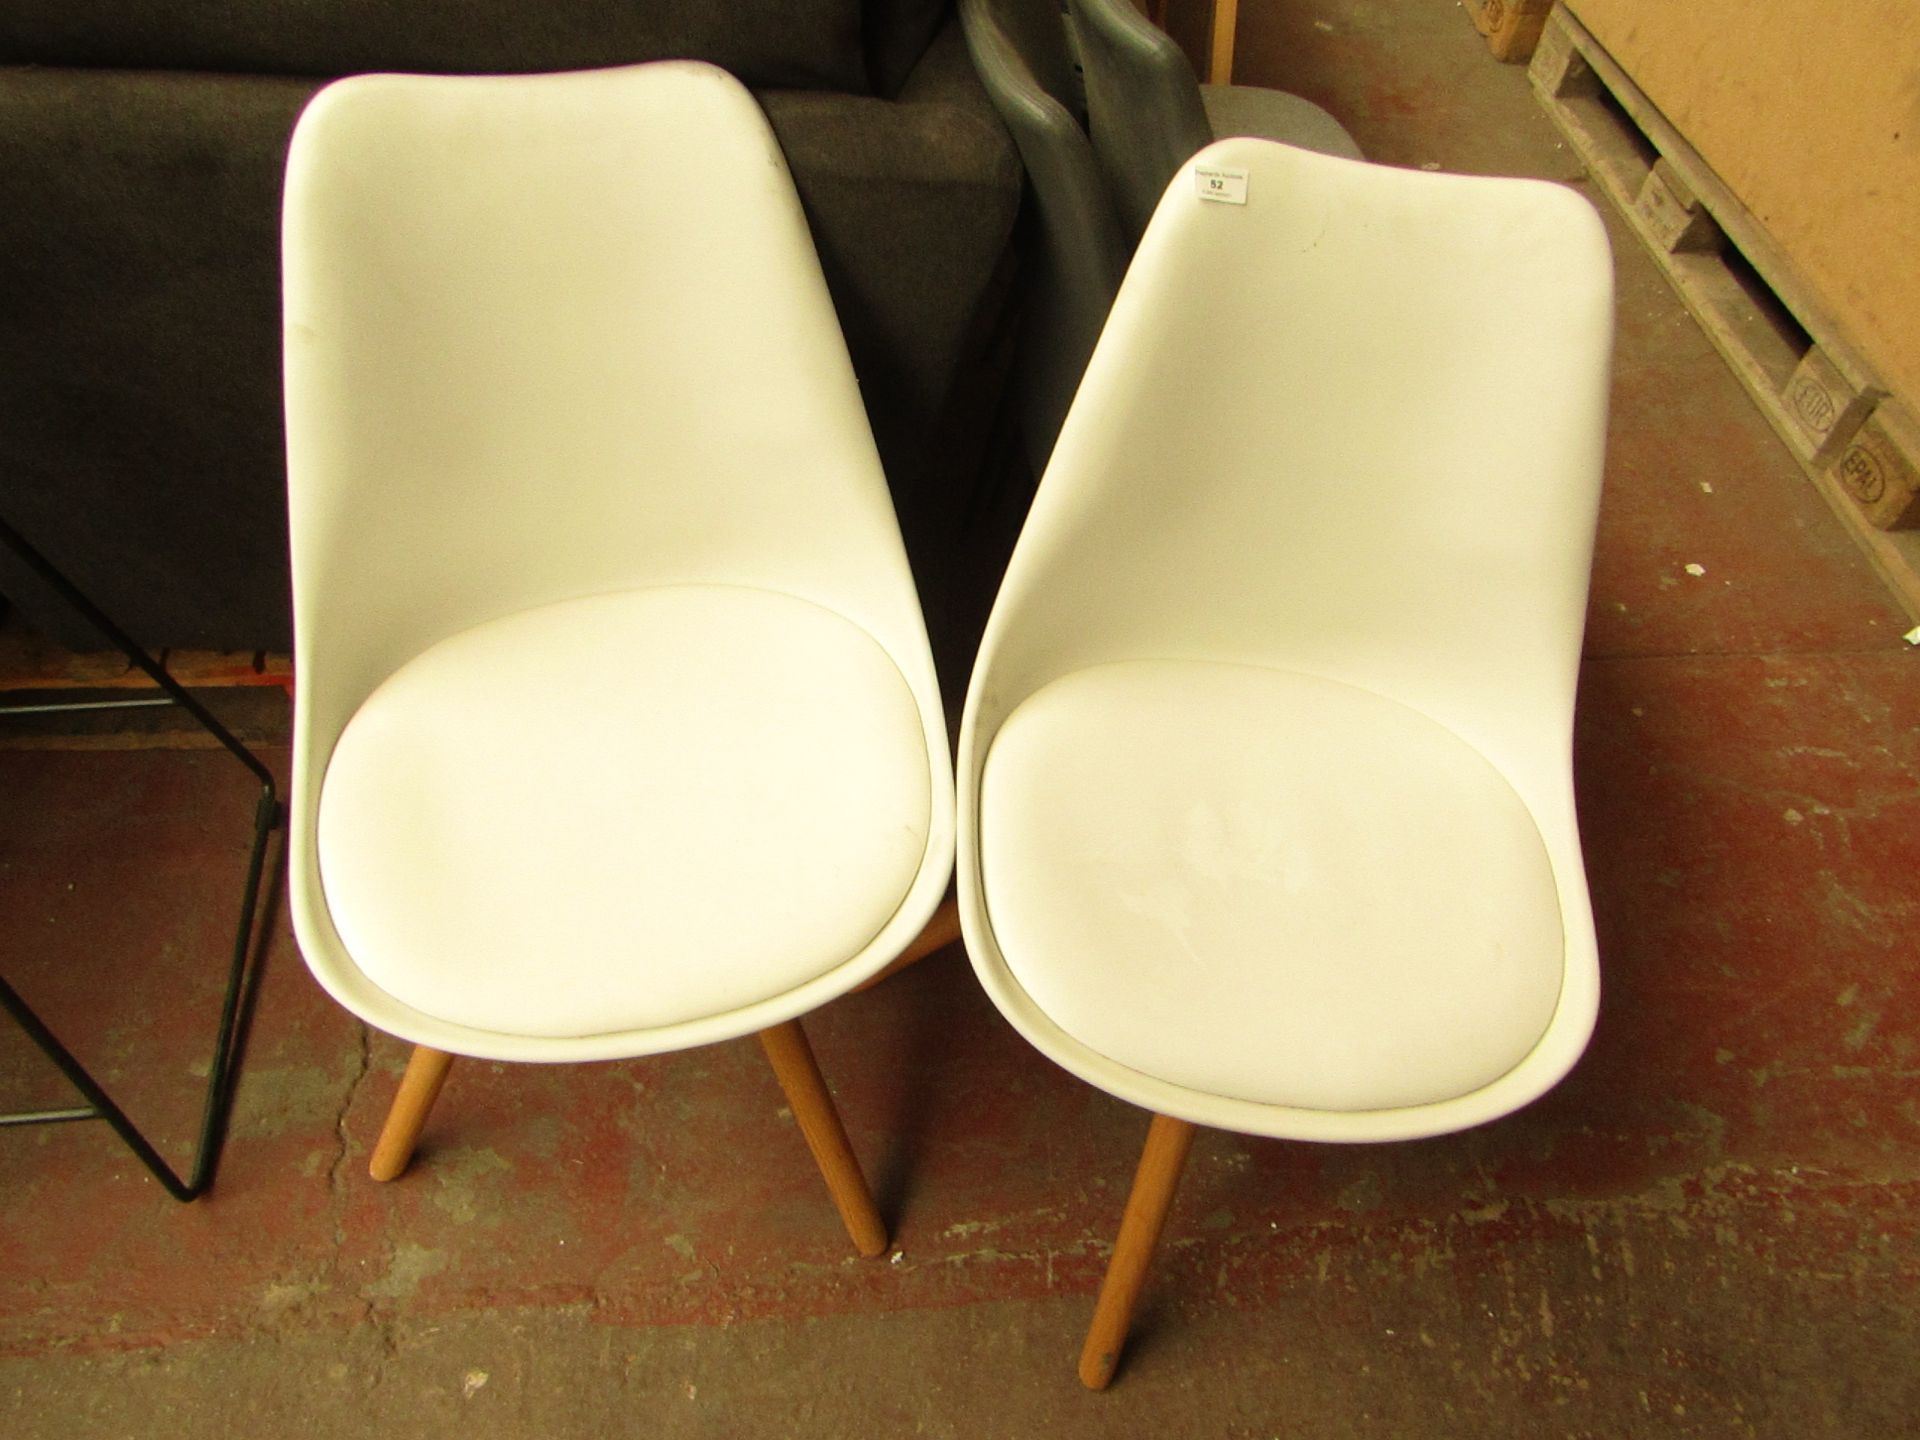 | 1X | MADE.COM SET OF 2 WHITE AND OAK DINING CHAIRS | NEEDS A CLEAN BUT NO MAJOR DAMAGE | RRP CIRCA